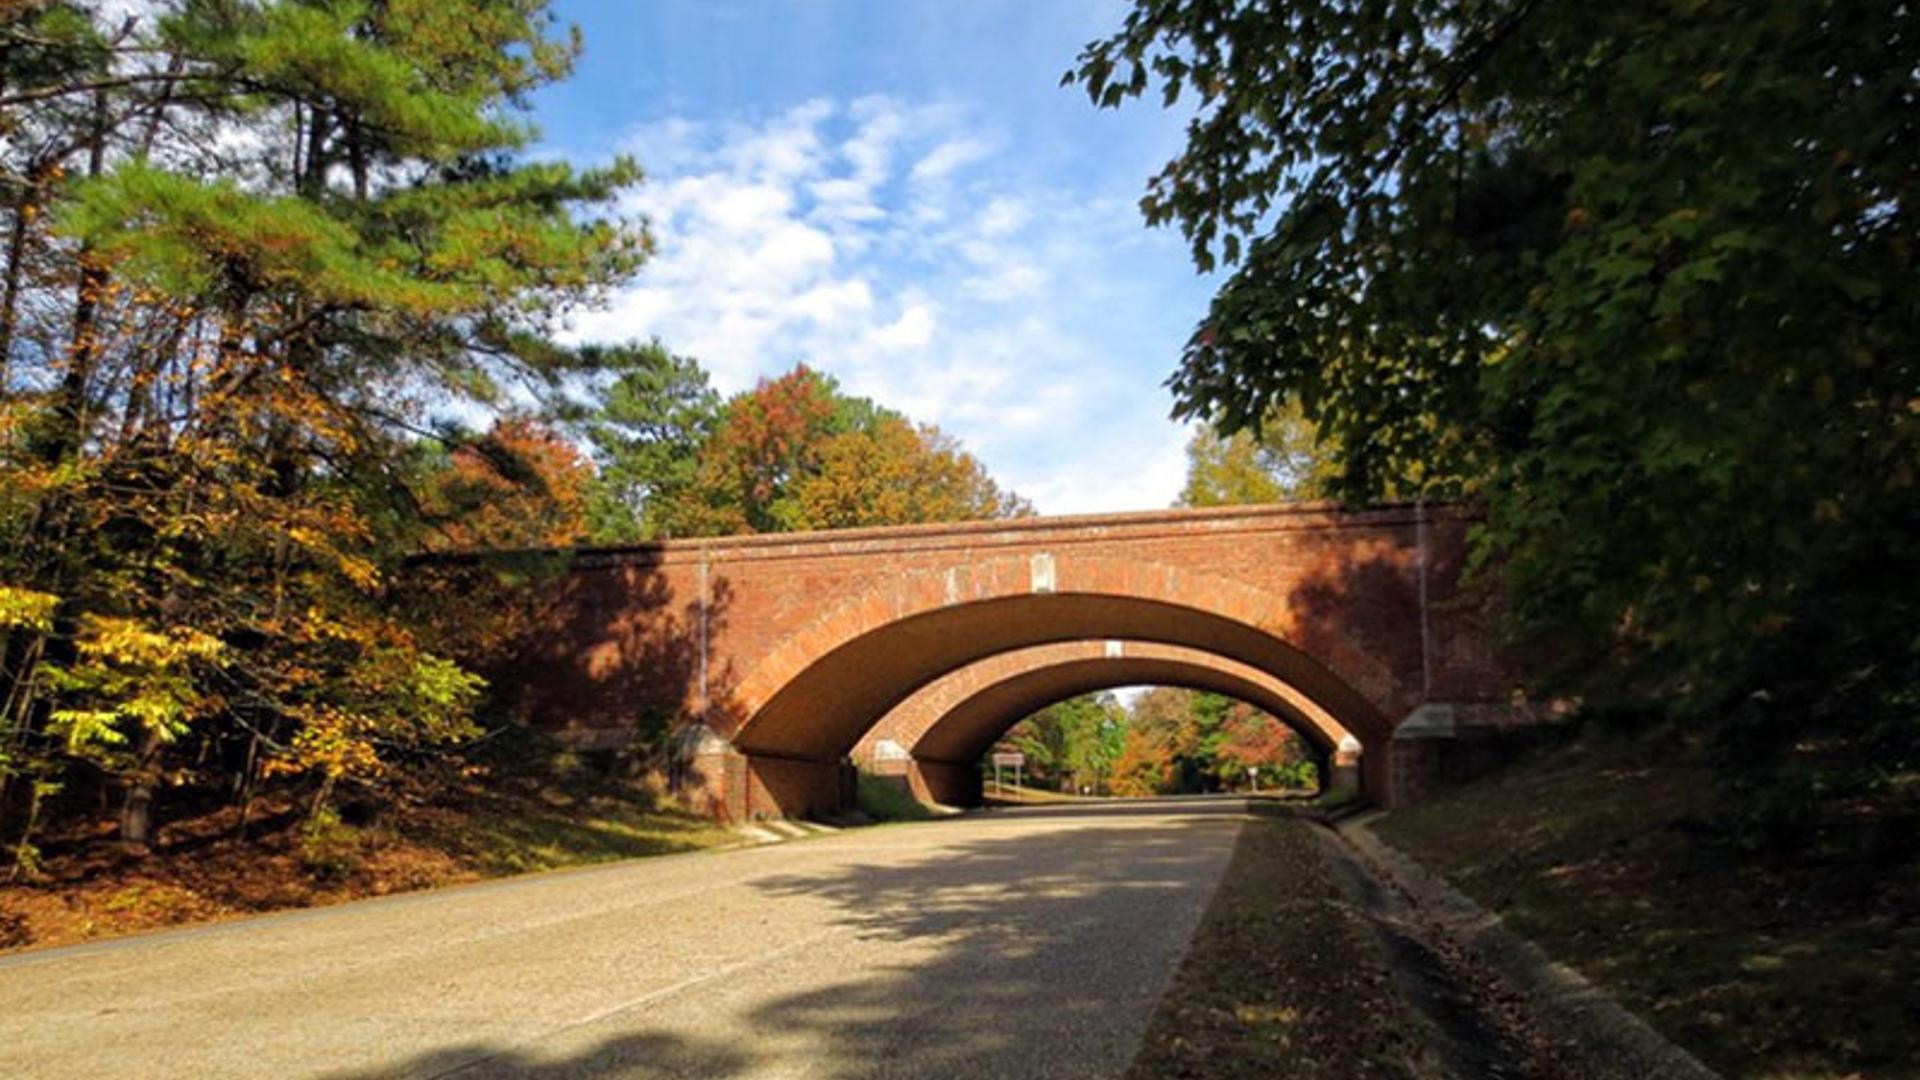 Paved road leading to two red stone bridges with trees on either side and a blue sky